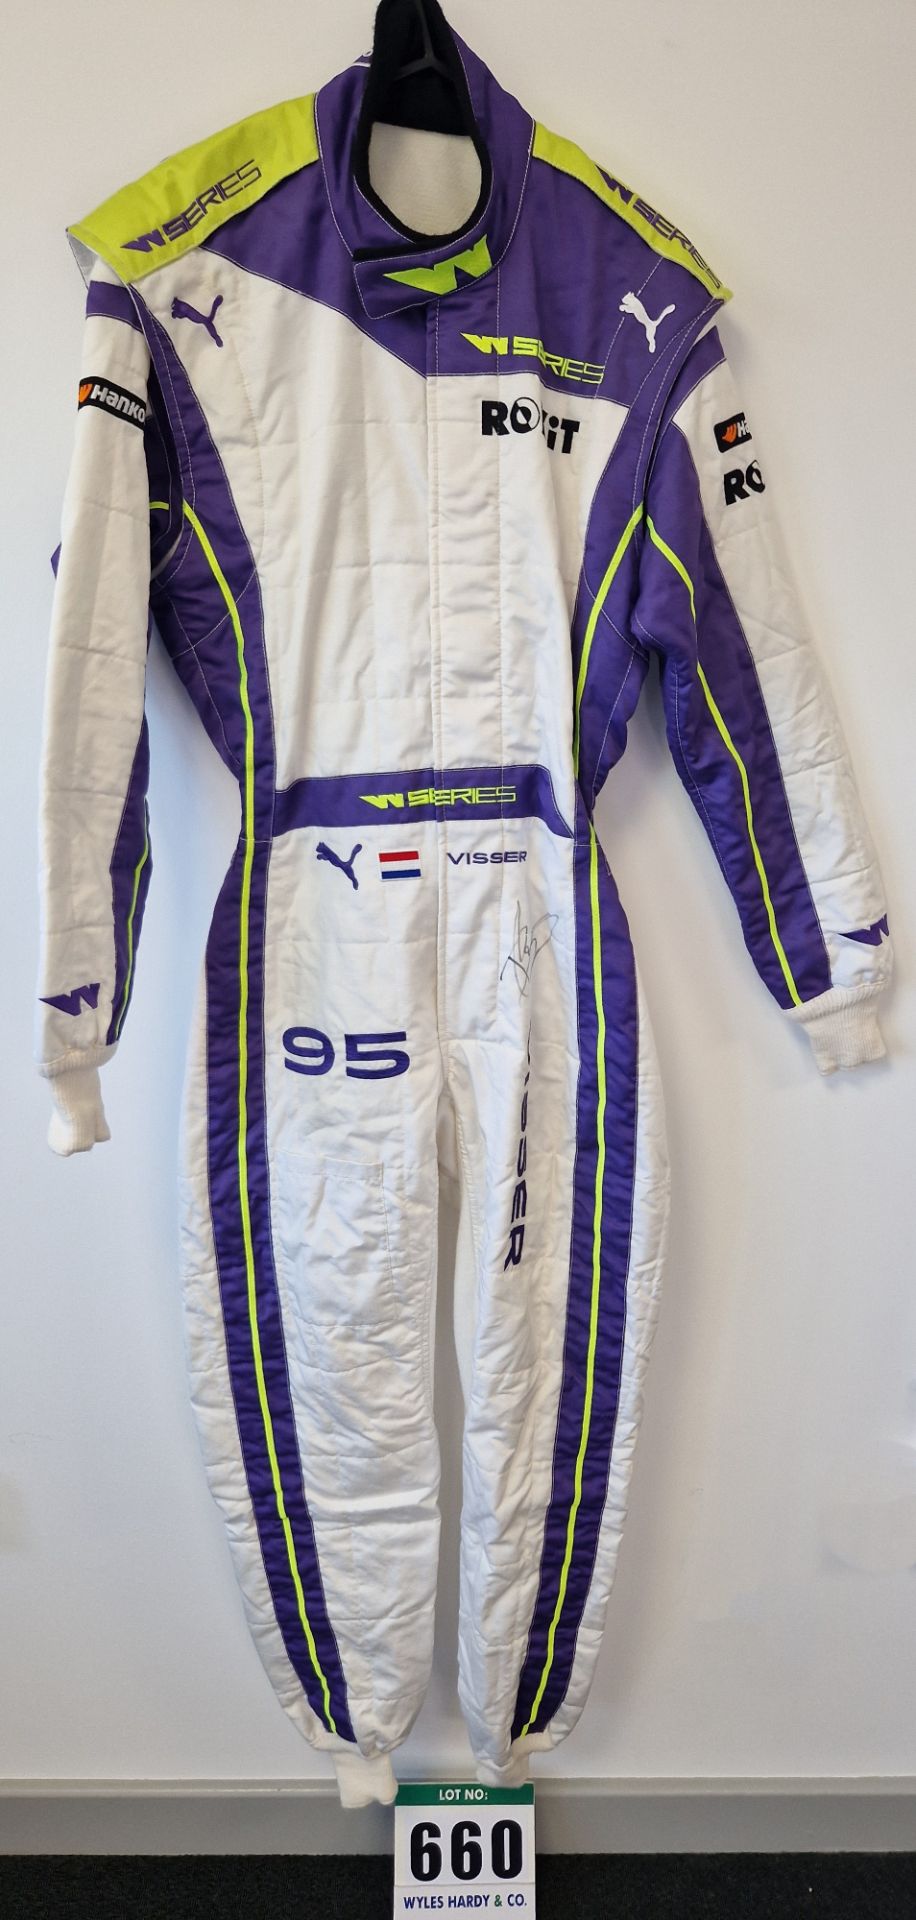 One PUMA FIA approved Race Suit (Size - Made to Measure) worn by Bietske Visser and signed by her wi